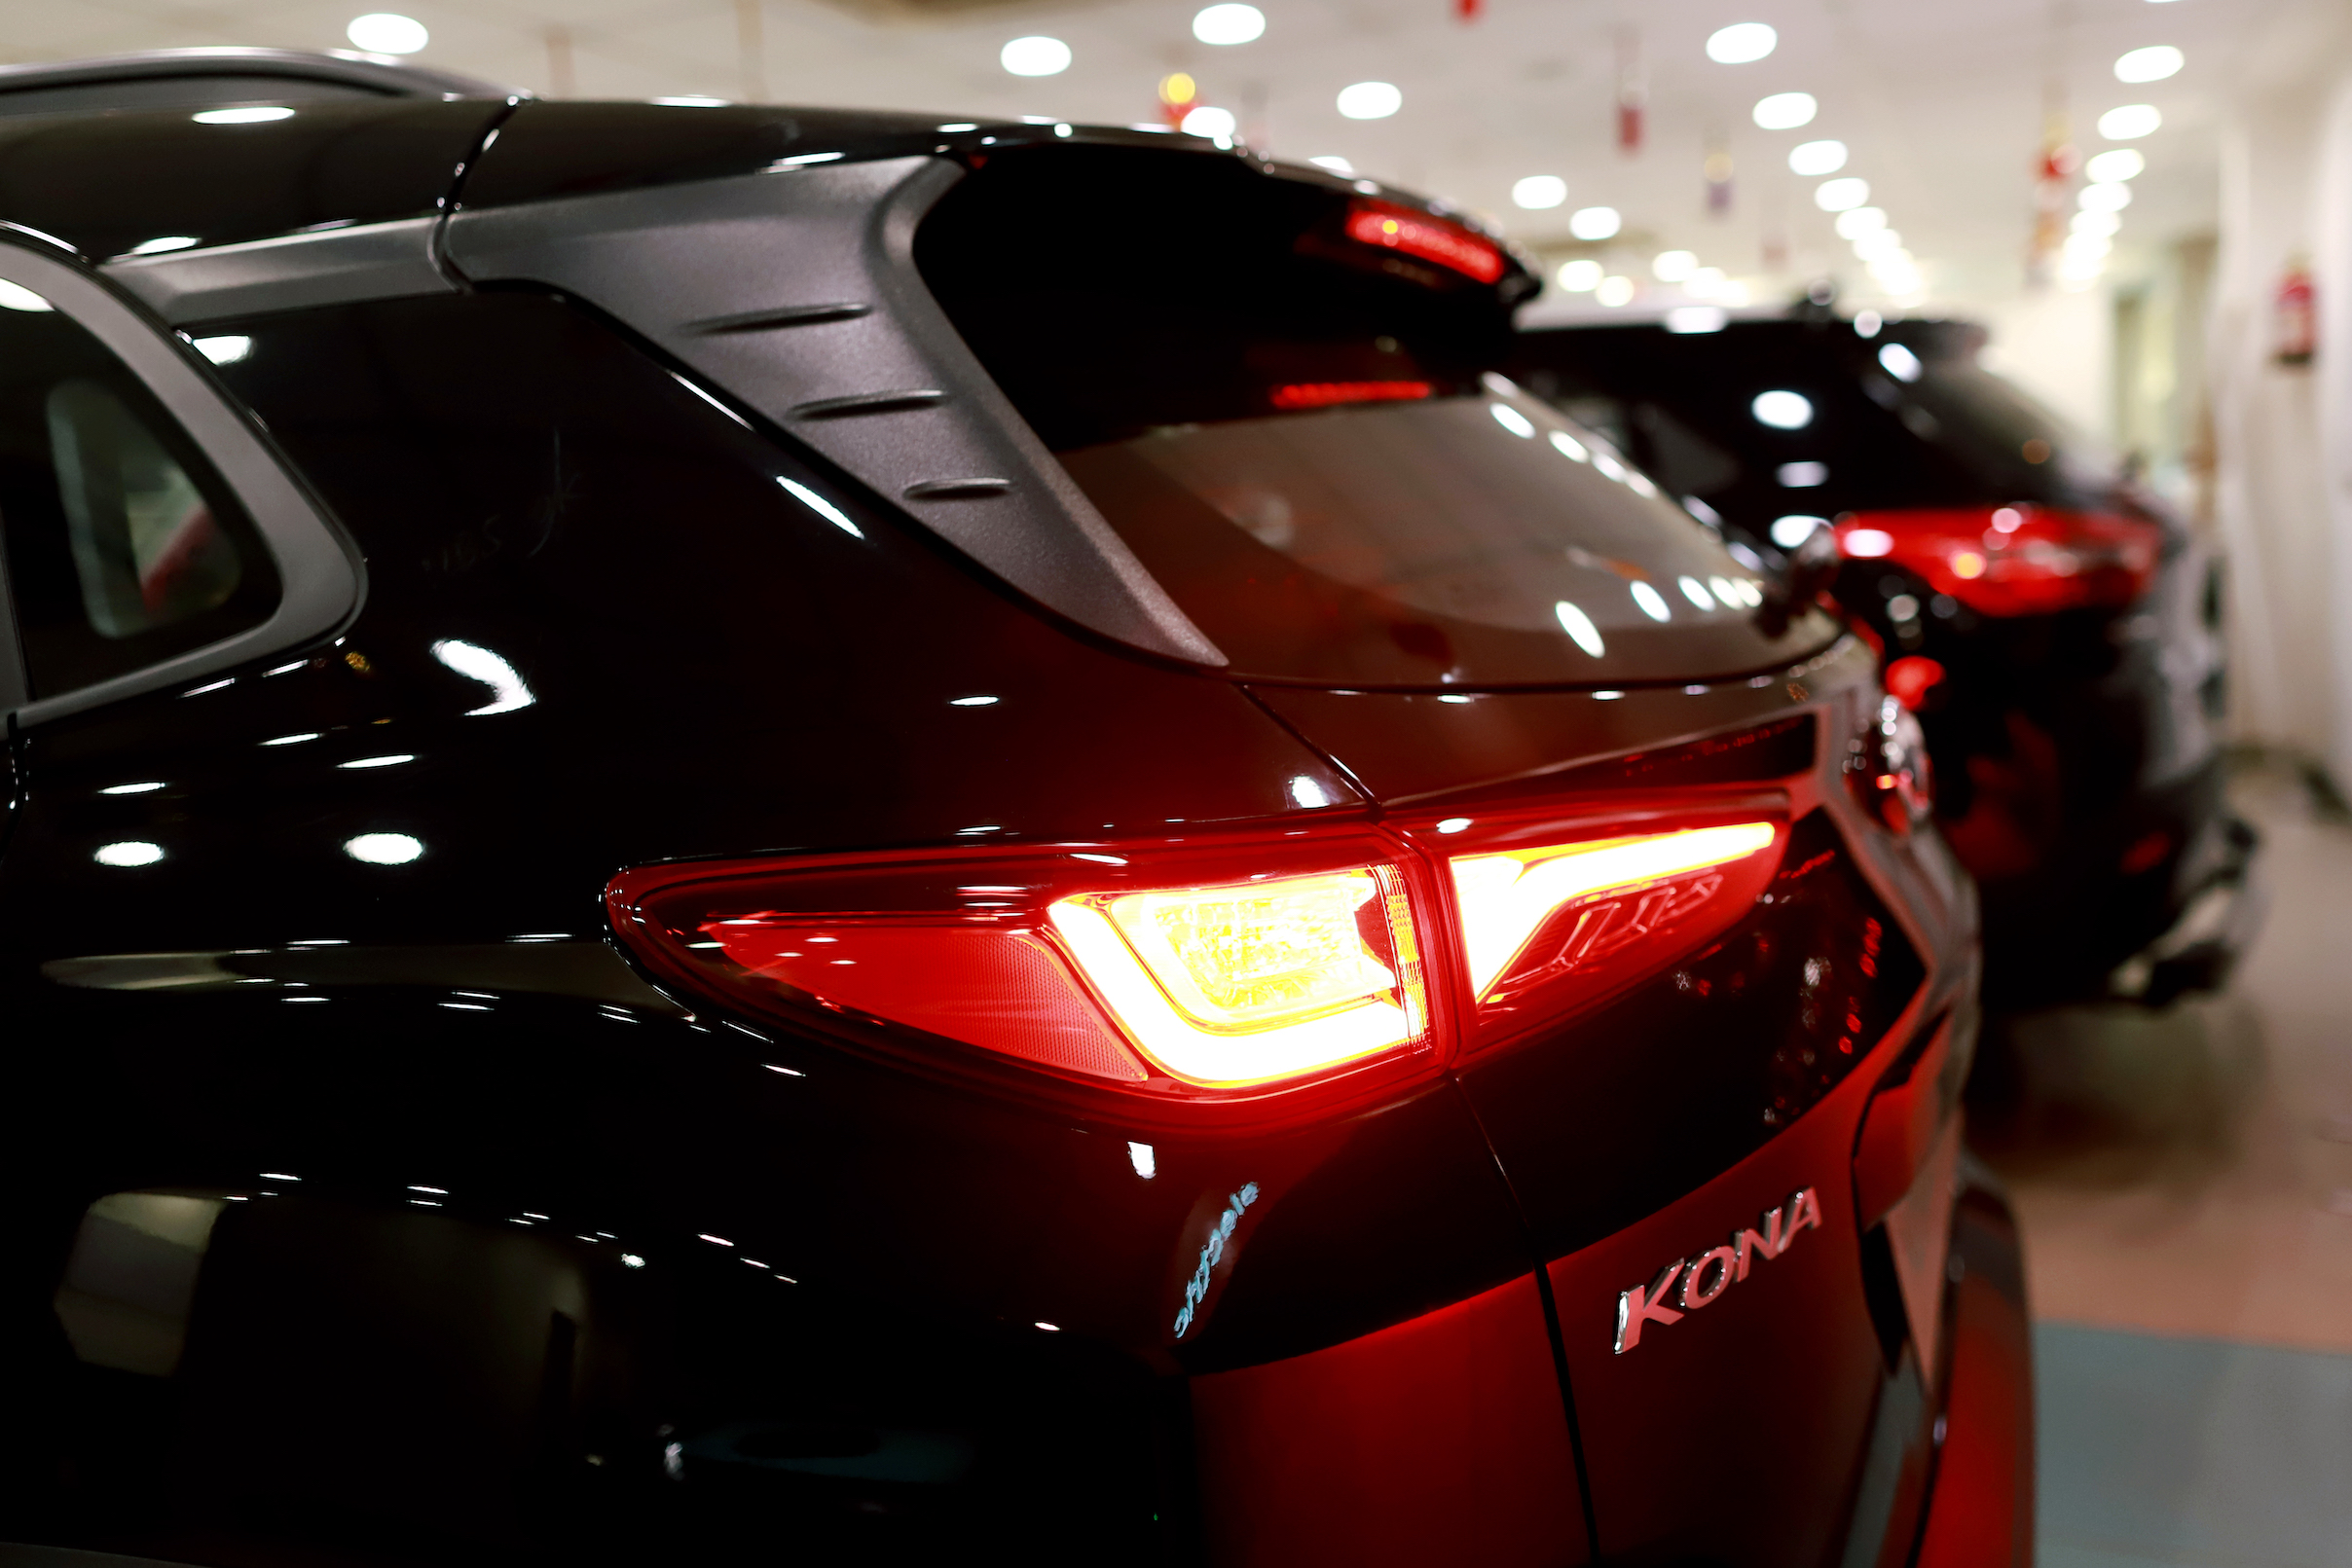 A Hyundai Motor Co. Kona electric vehicle stands on display with other vehicles at the company's Koncept Hyundai showroom in New Delhi